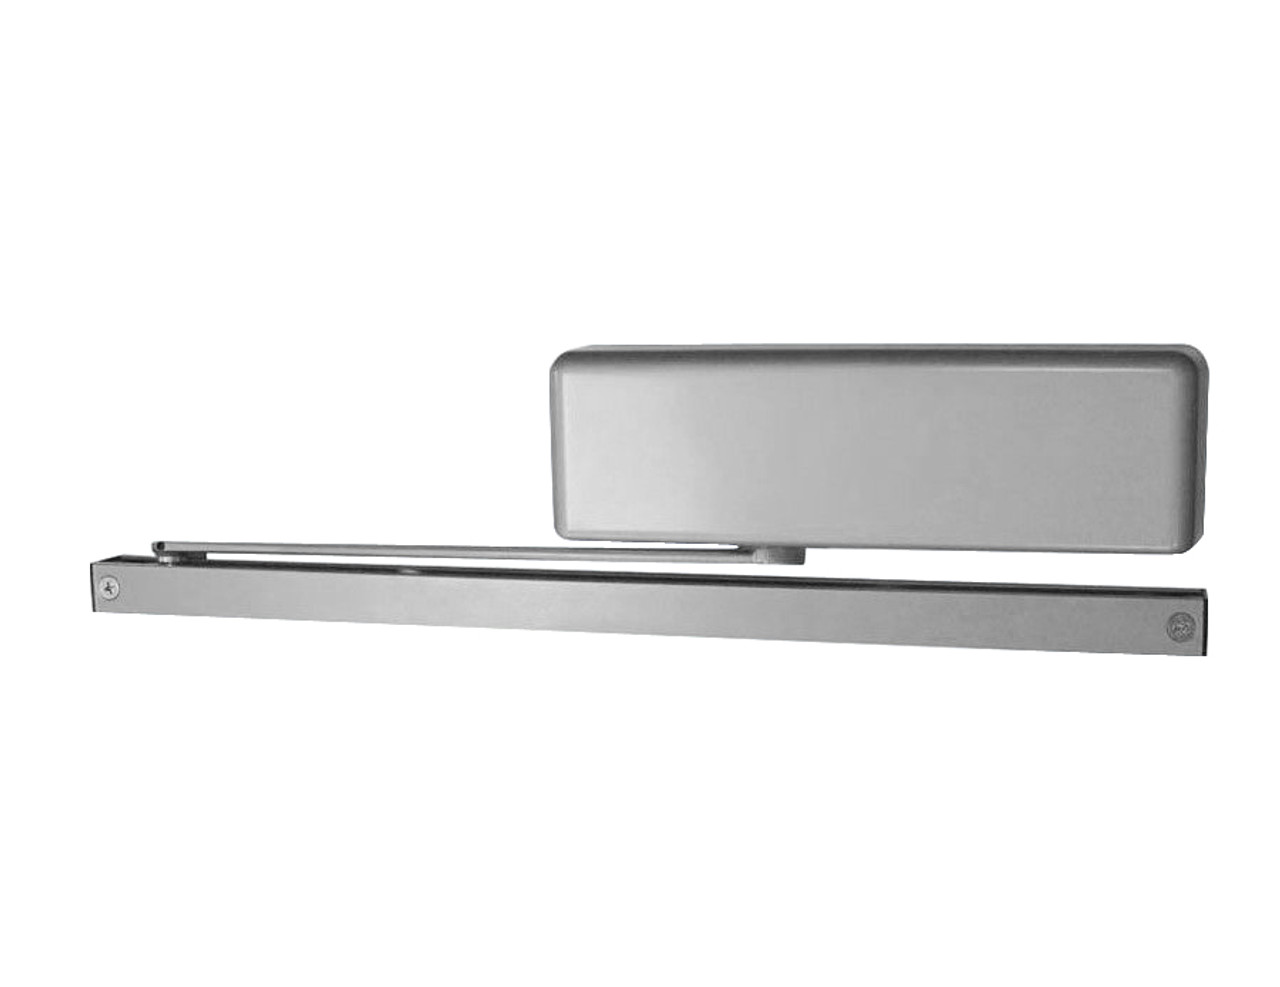 4021T-H-BUMPER-LH-US26D LCN Door Closer Hold Open Track with Bumper in Satin Chrome Finish